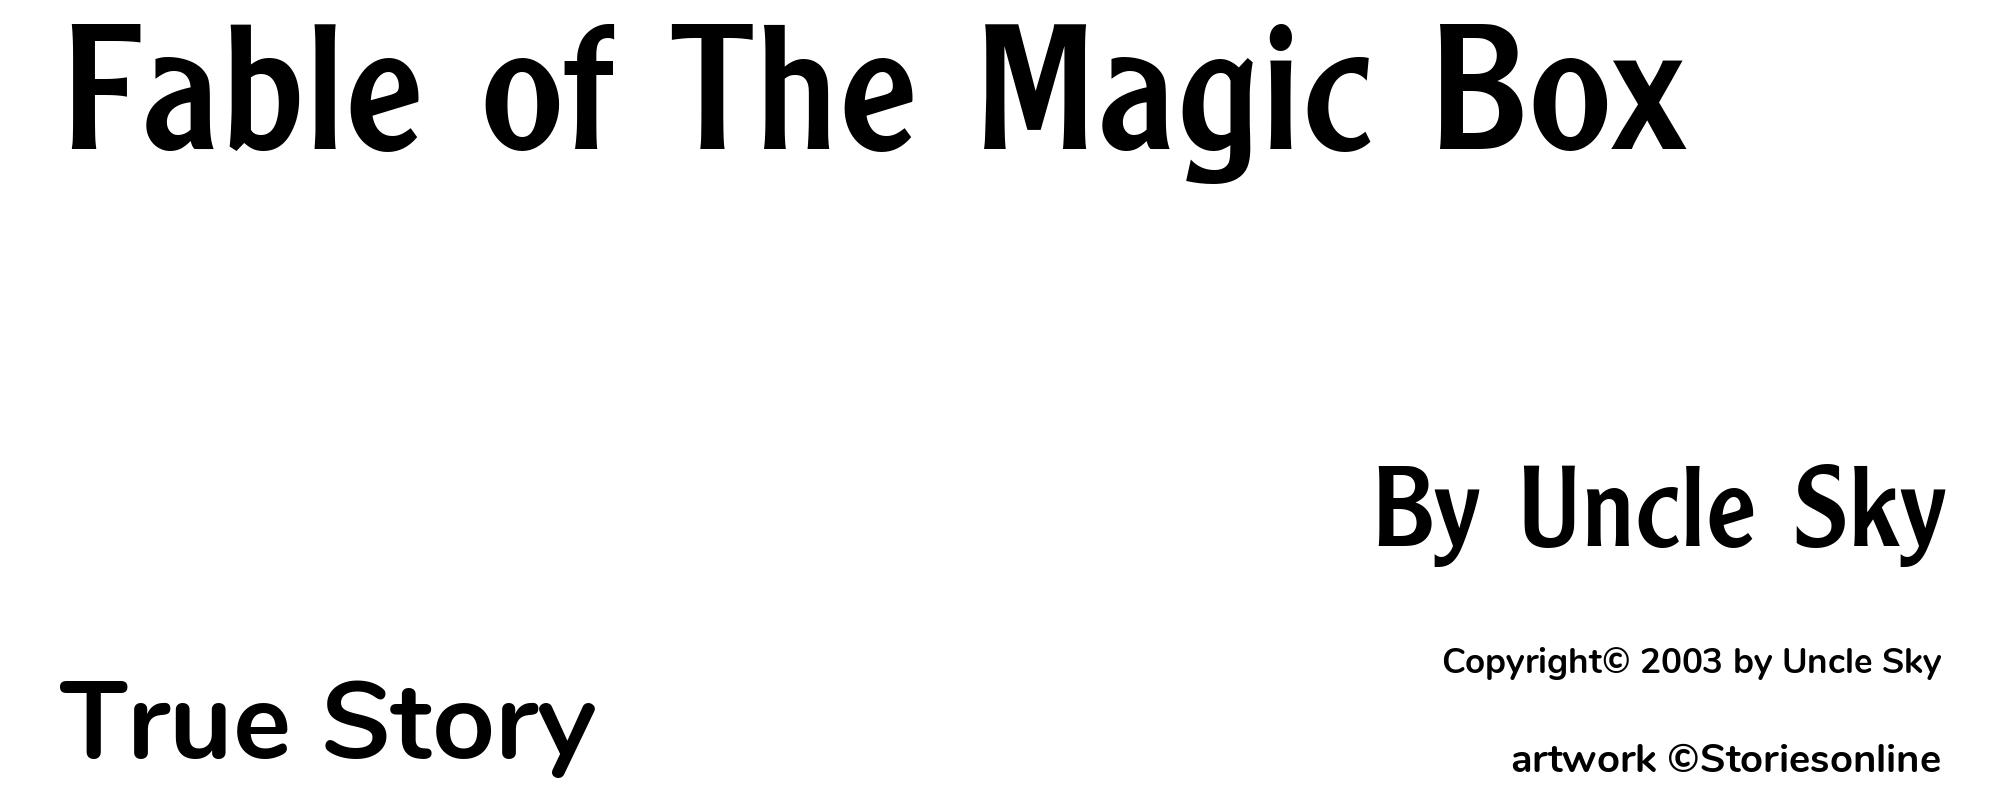 Fable of The Magic Box - Cover